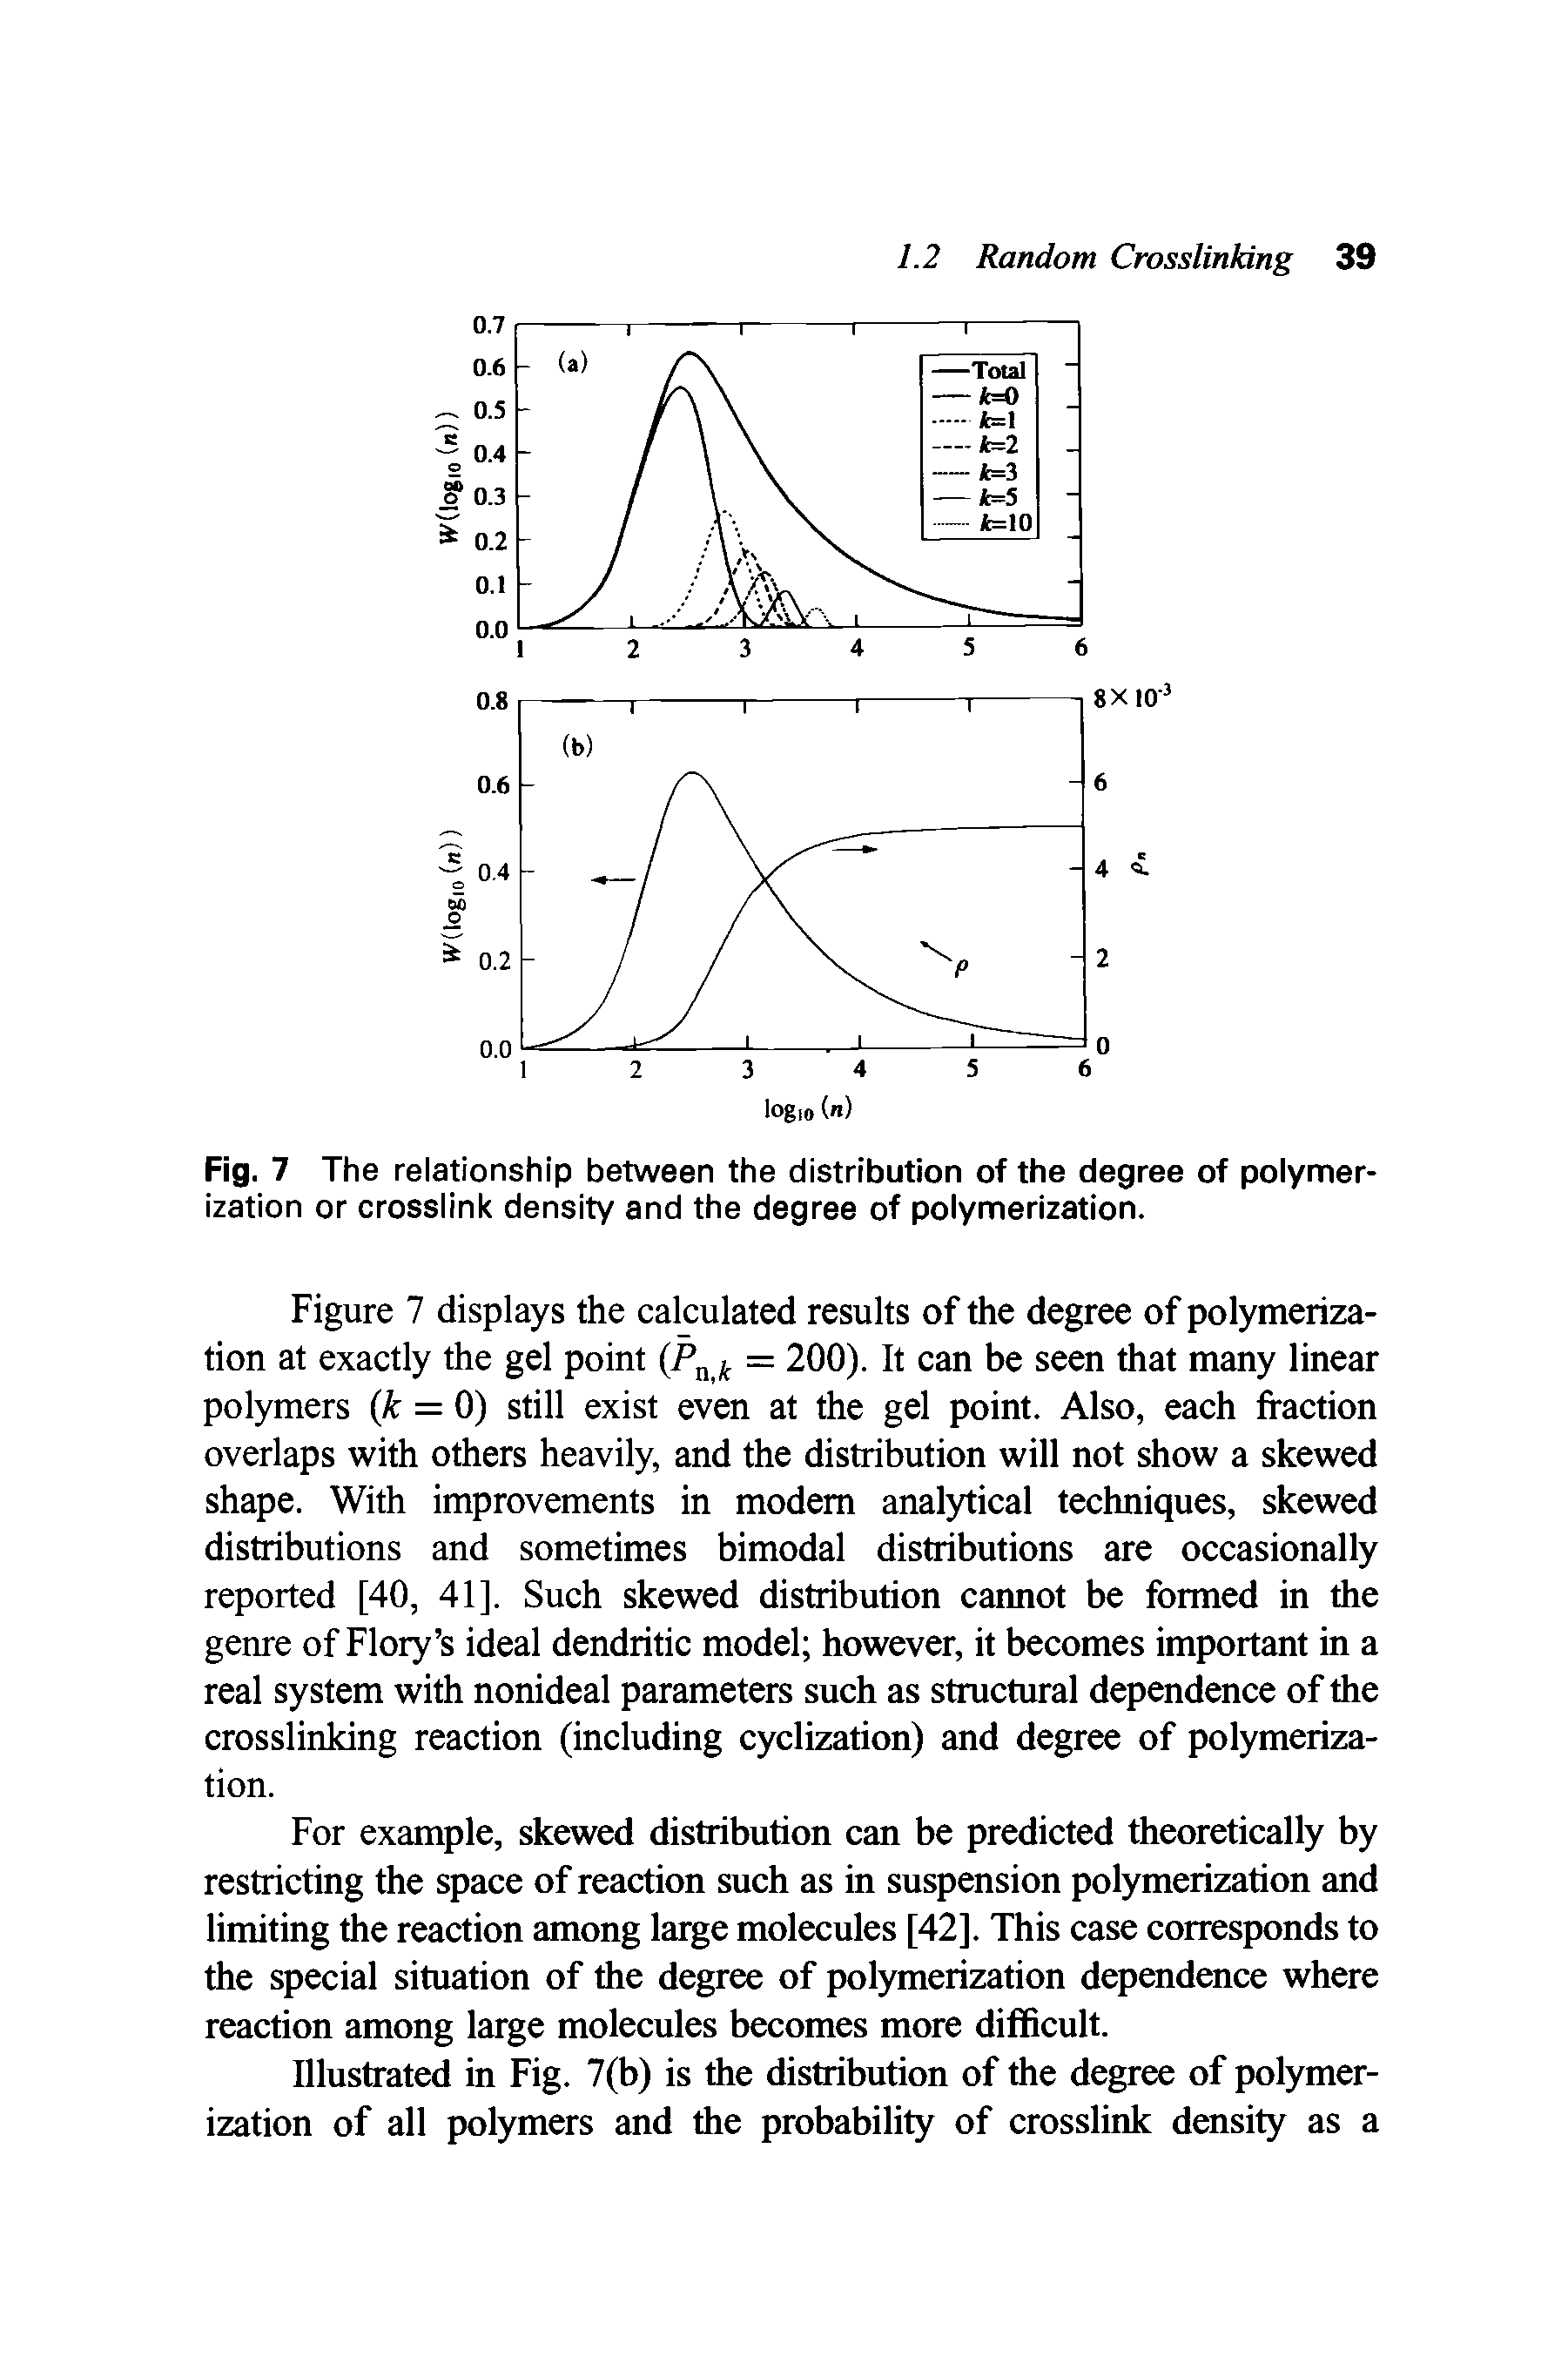 Fig. 7 The relationship between the distribution of the degree of polymerization or crosslink density and the degree of polymerization.